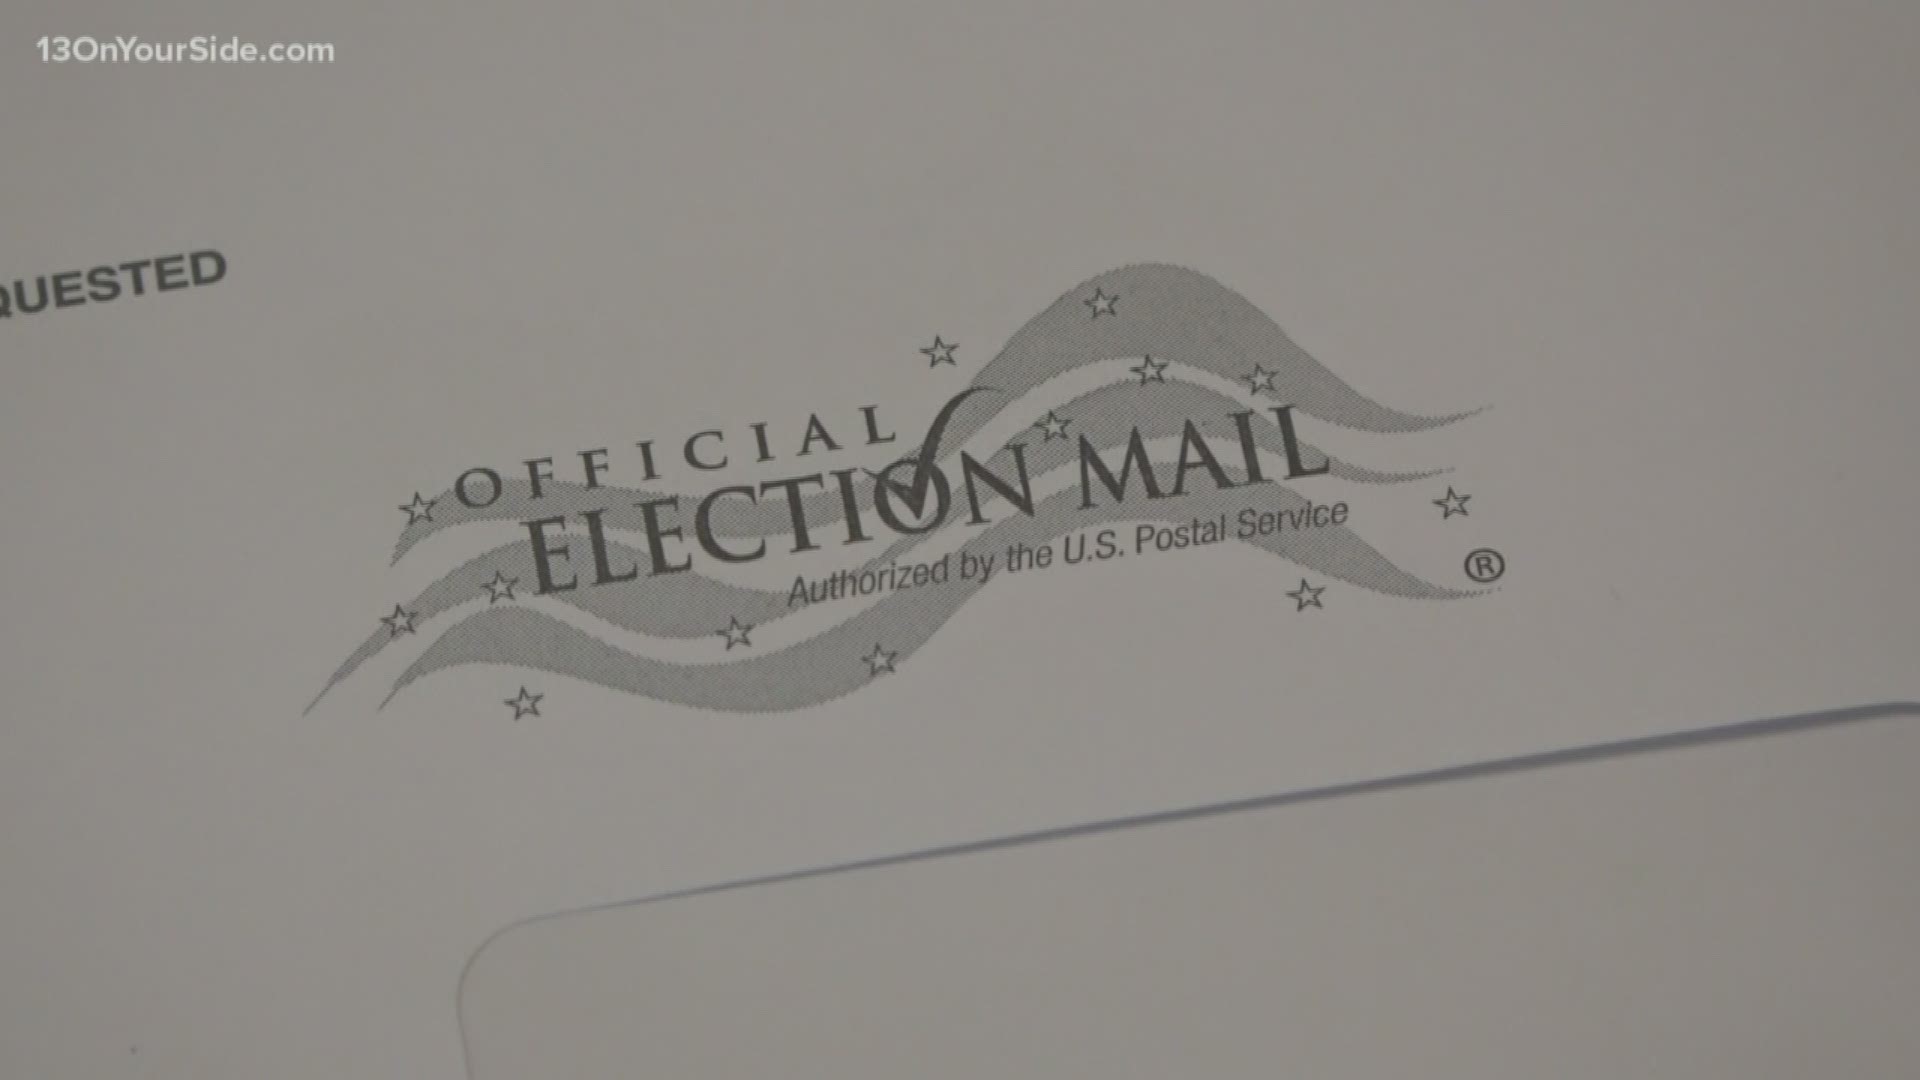 Some people are concerned that could cause absentee voting could cause a delay in election results.